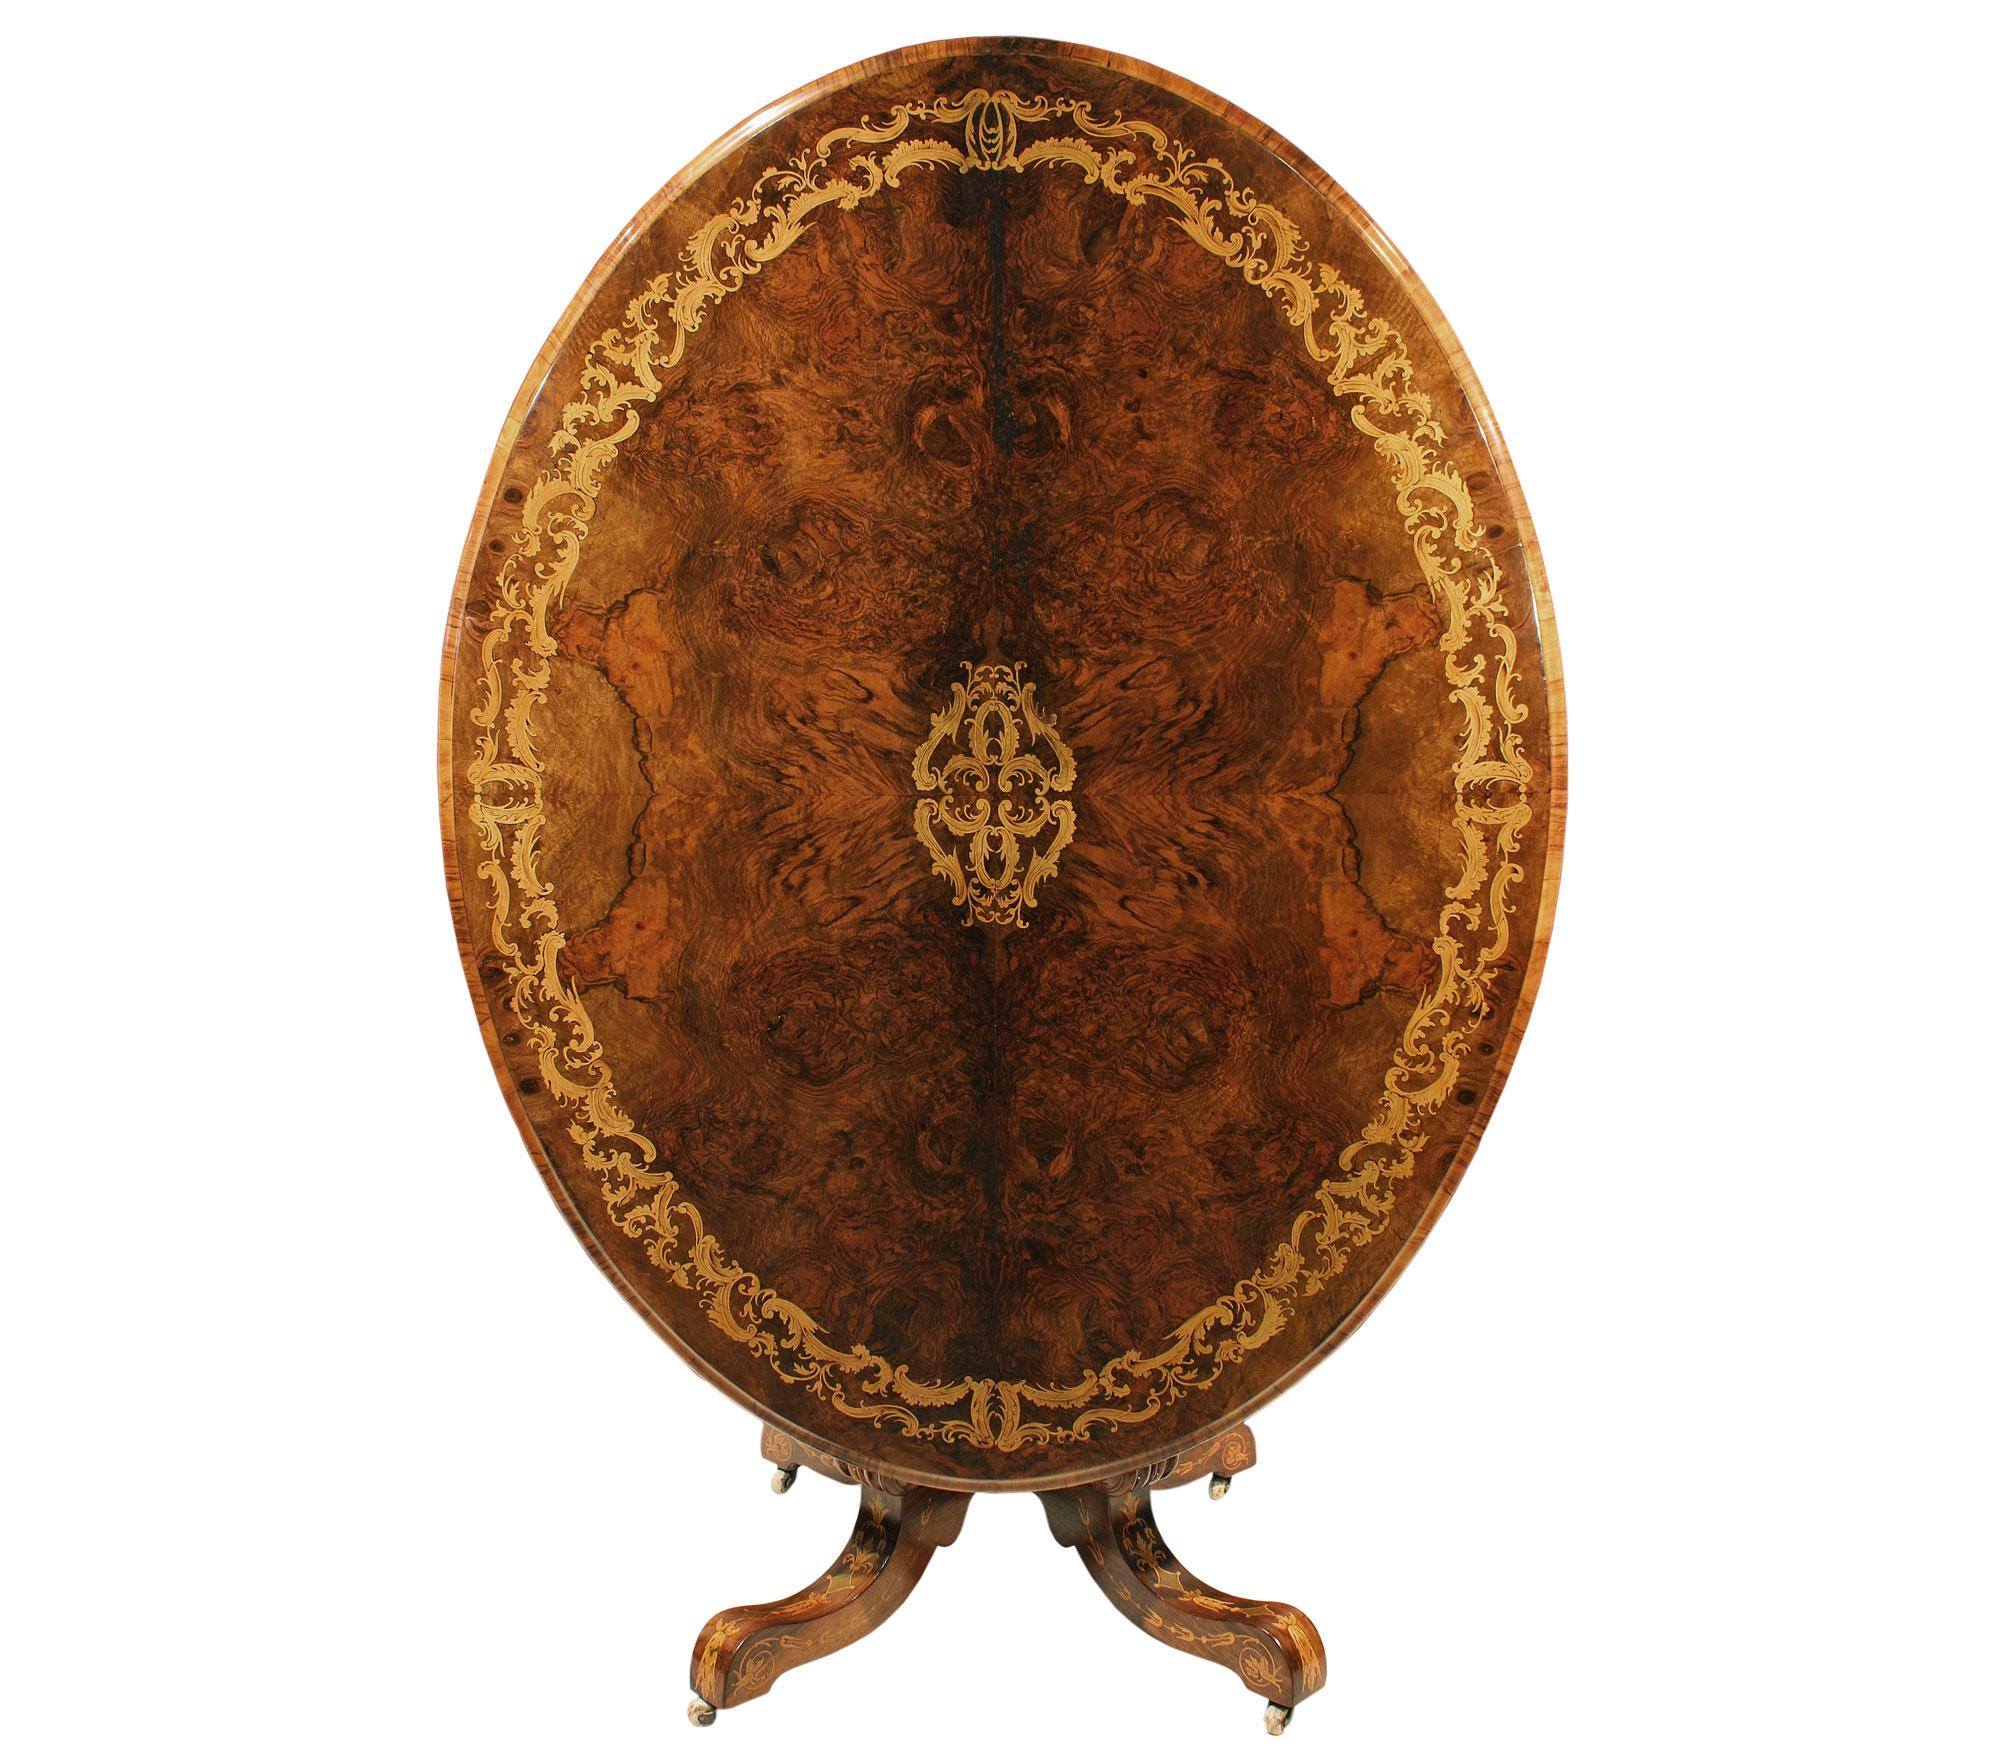 A very decorative and large-scale 19th century English oval tilt-top center table in various walnuts and exotic woods. The table is raised by the original porcelain casters with four C scrolled supports joined by a richly inlaid bottom tier. The